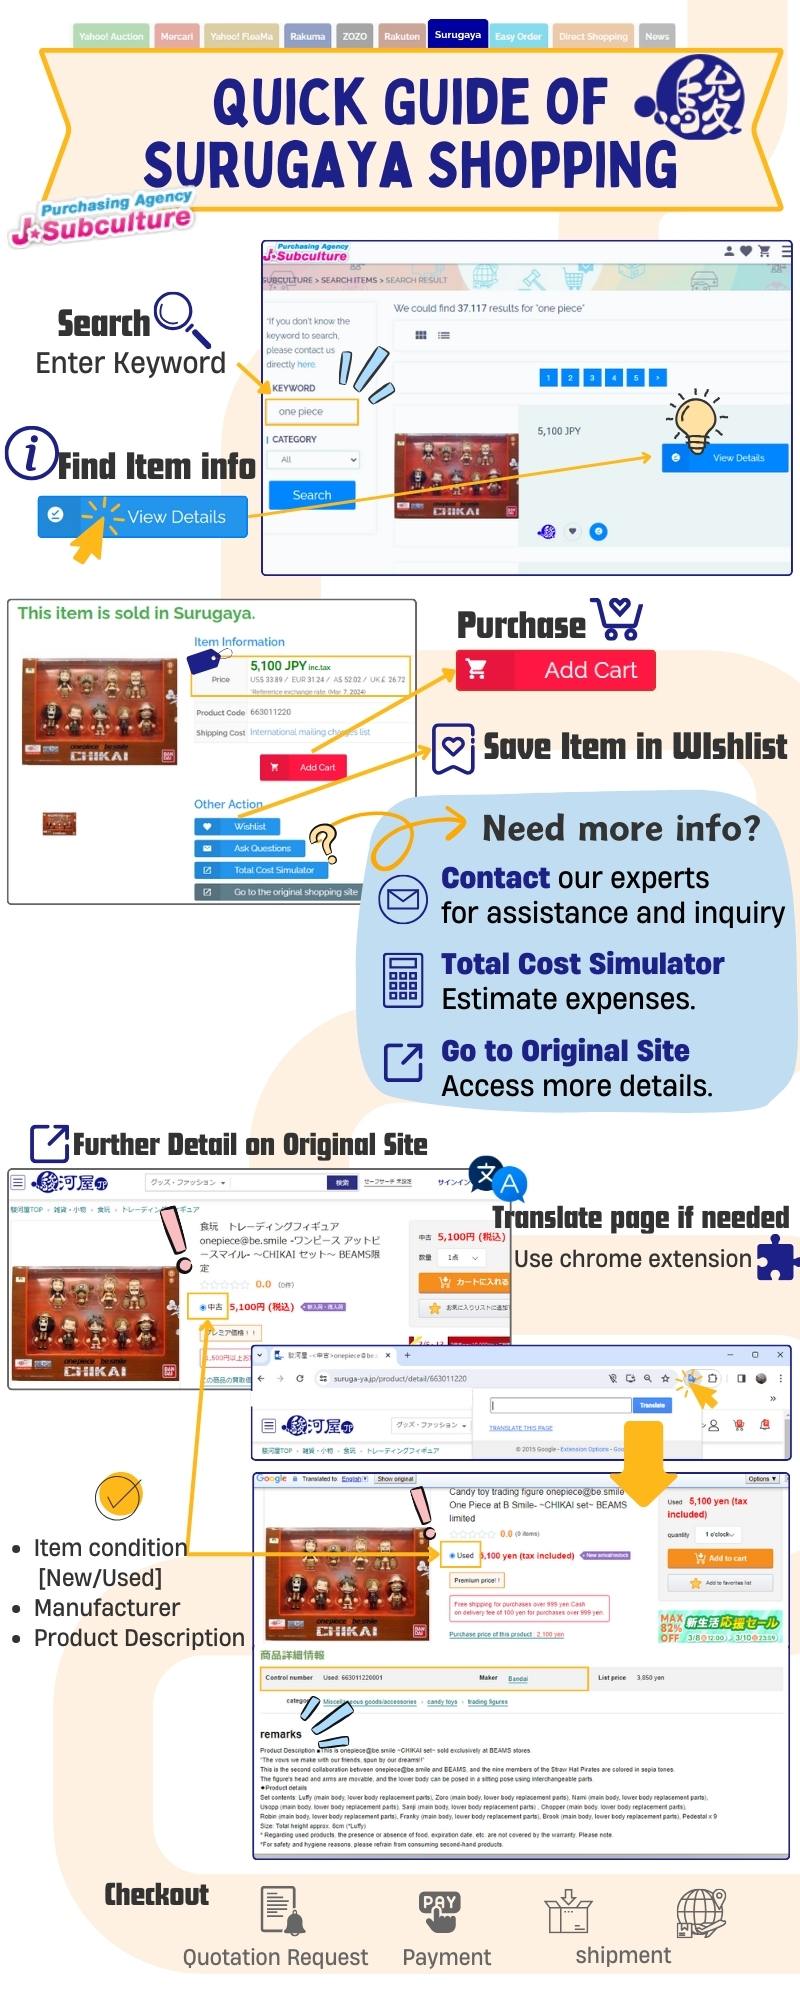 Infographic image of Quick Guide for Shopping from Surugaya with J-Subculture